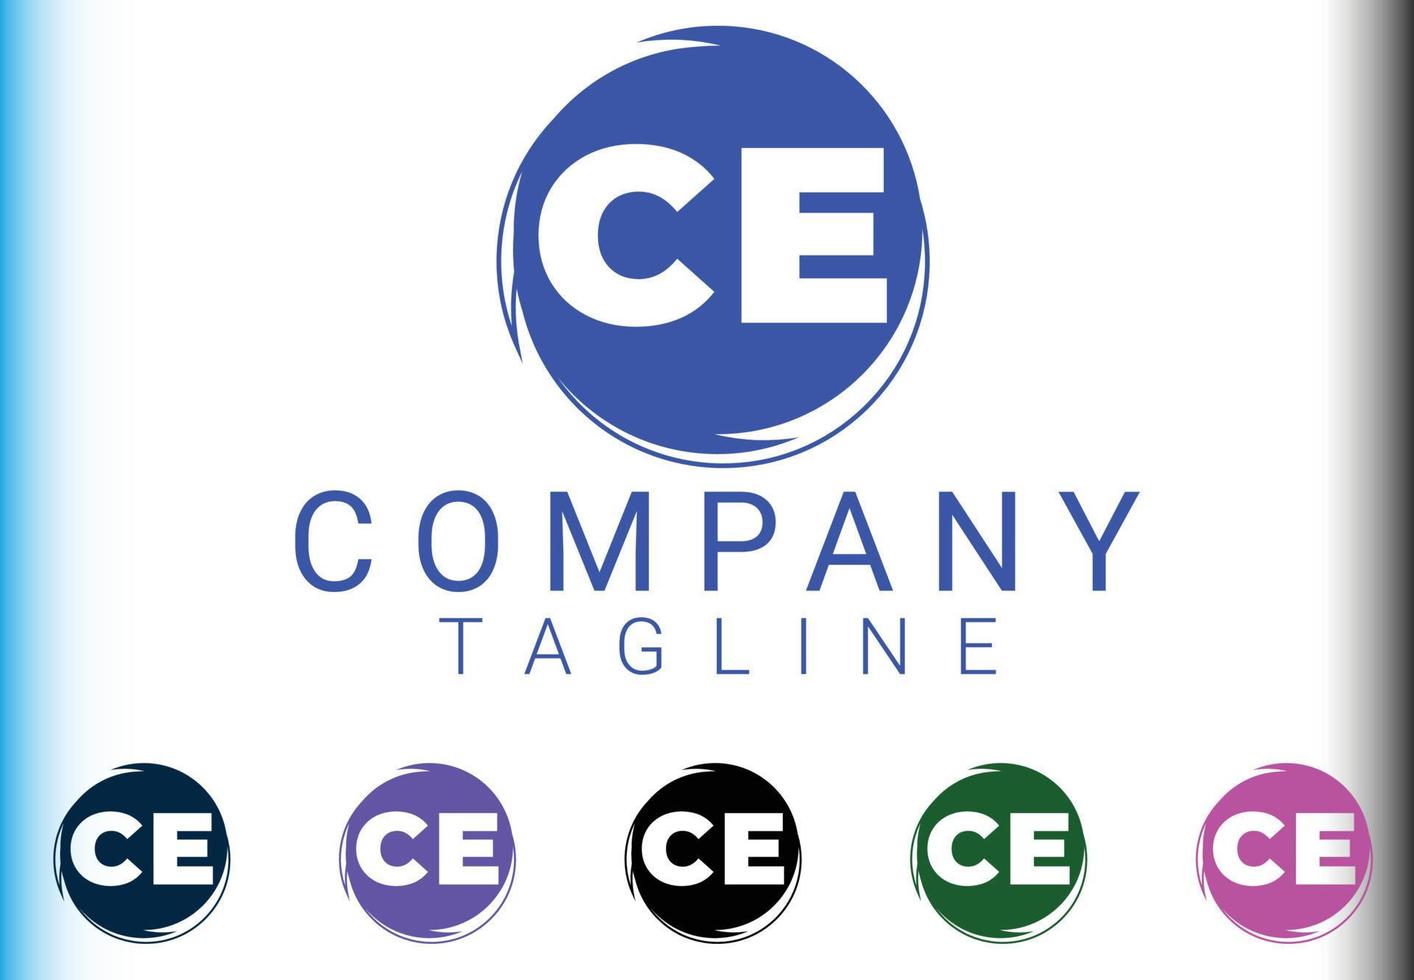 CE letter new logo and icon design vector